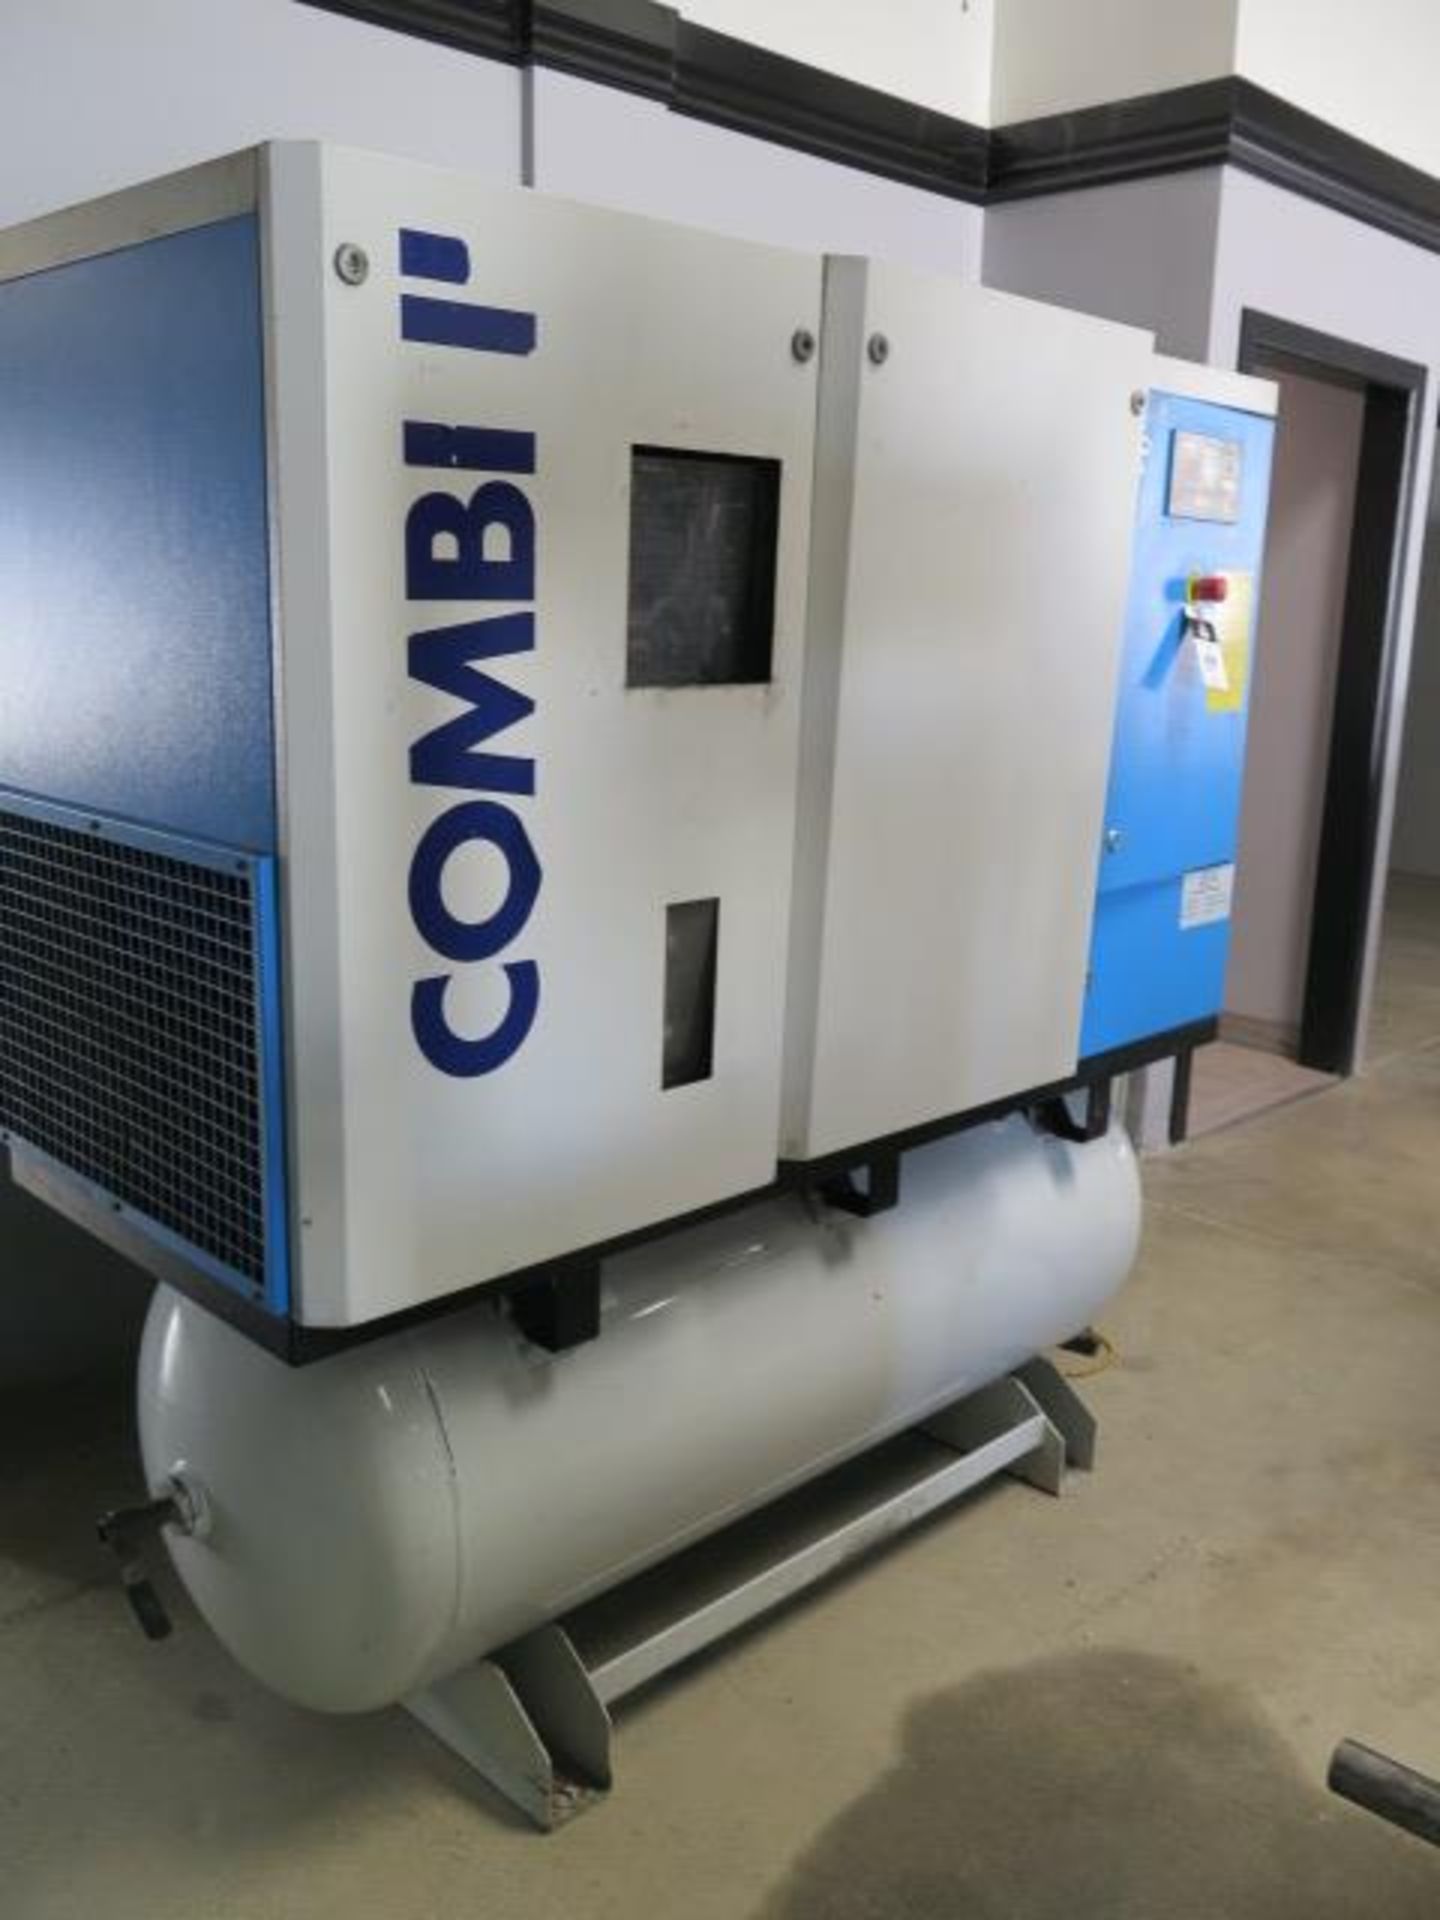 Alup COMBI II mdl. C25255 25Hp Rotary Air Comp s/n HOP250016 w/ Alup Digital Controls, SOLD AS IS - Image 2 of 10